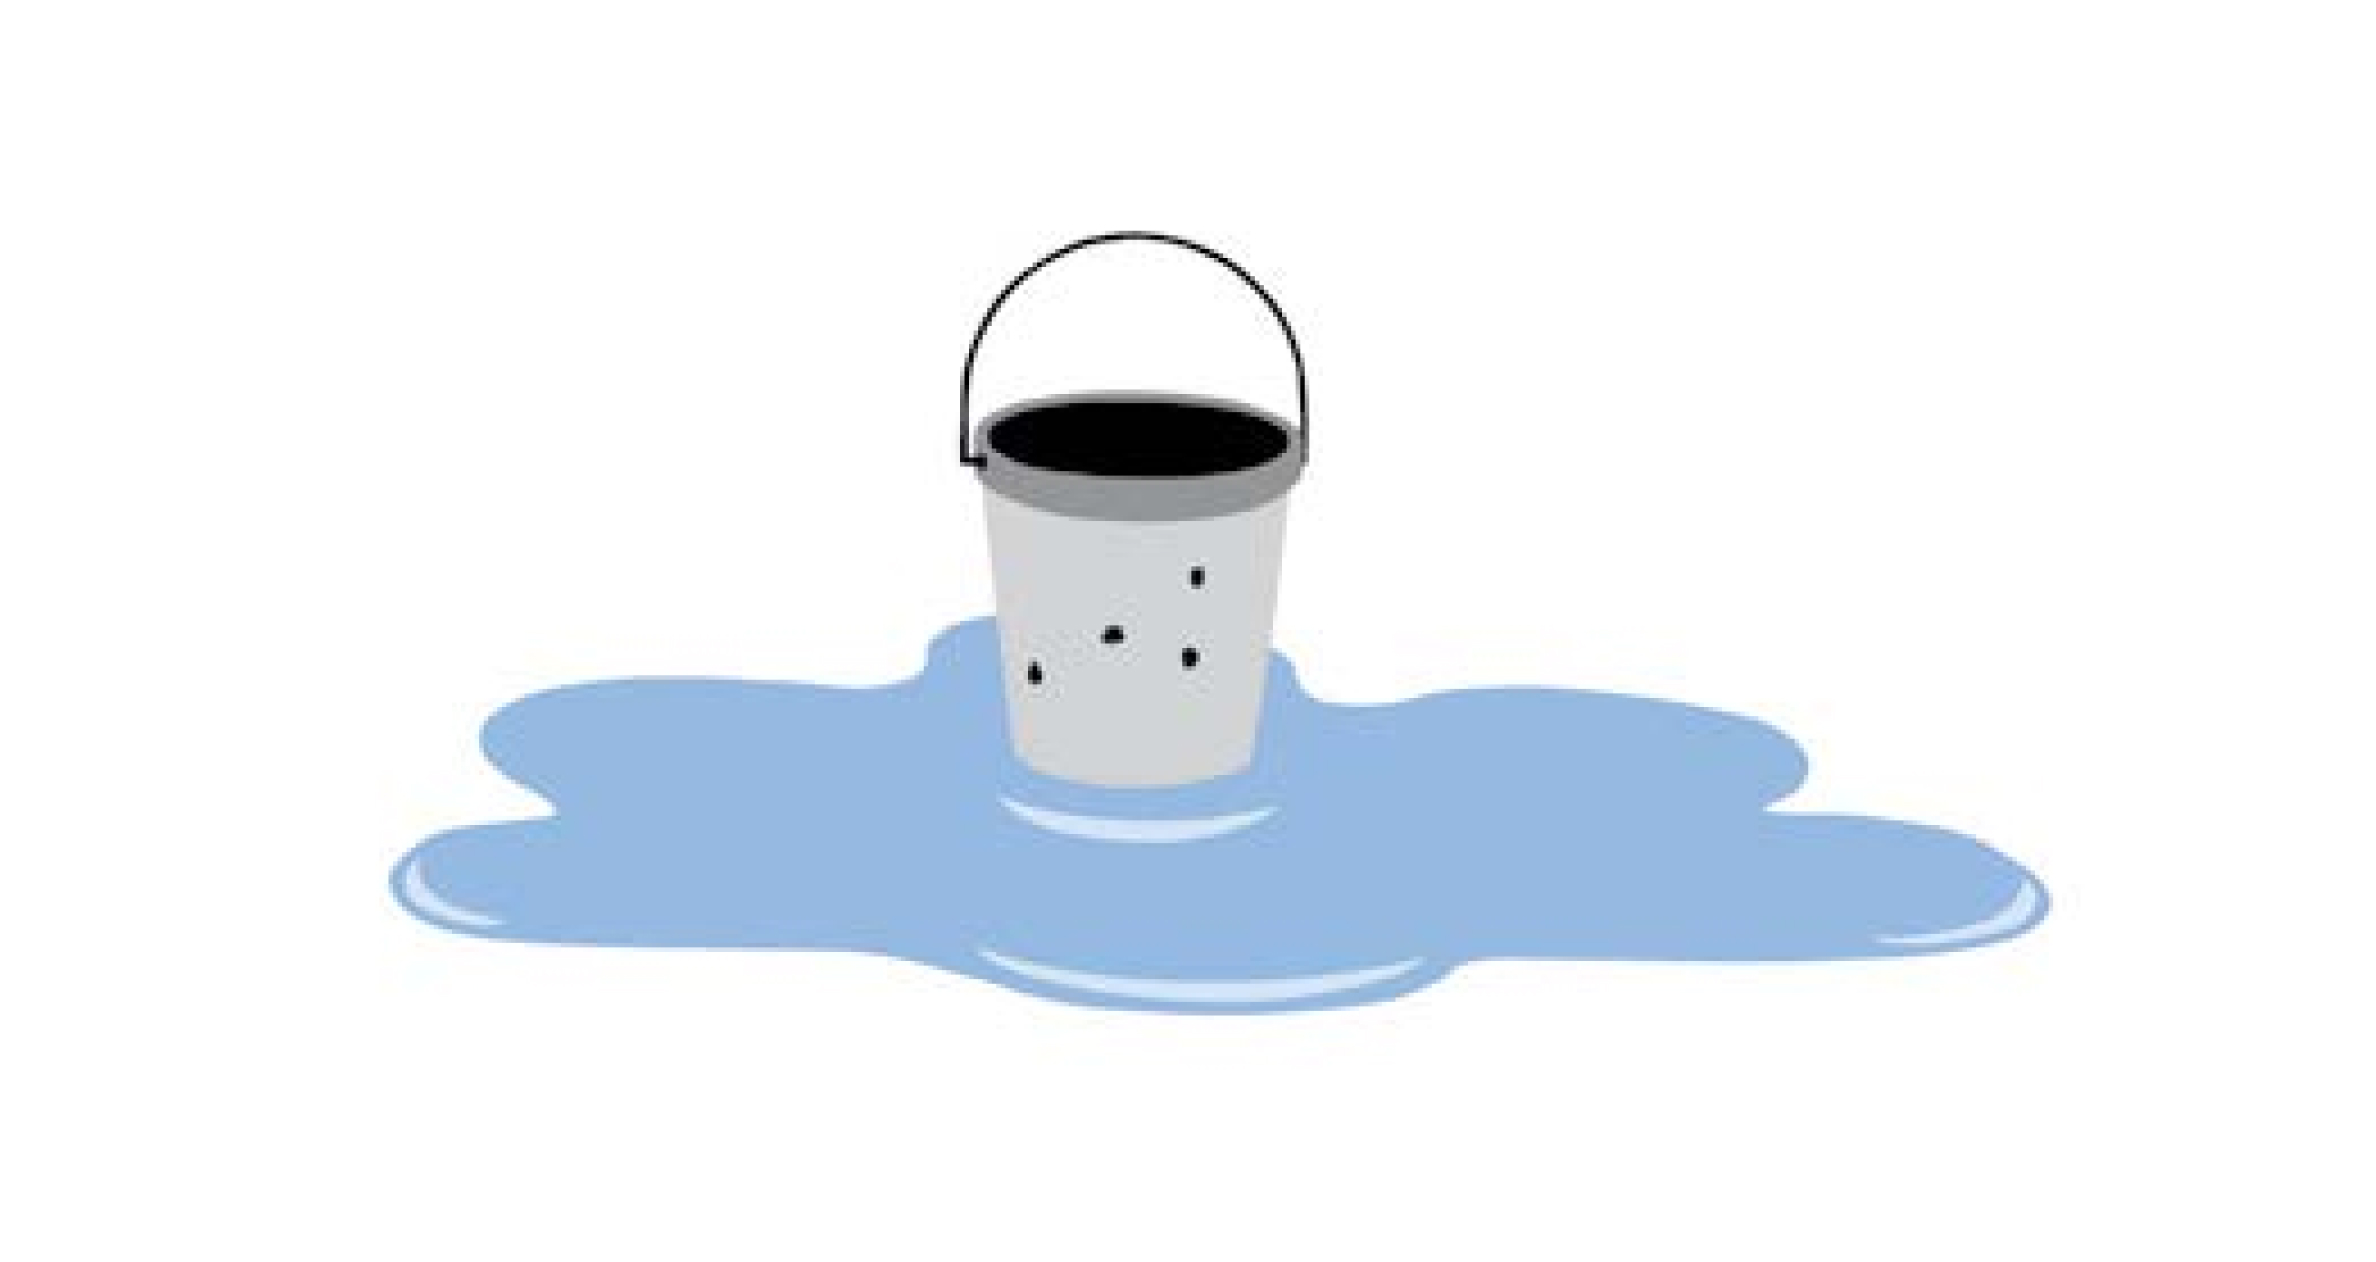 An illustration of a bucket. There are holes in the bucket and water is draining out into a puddle on the floor.